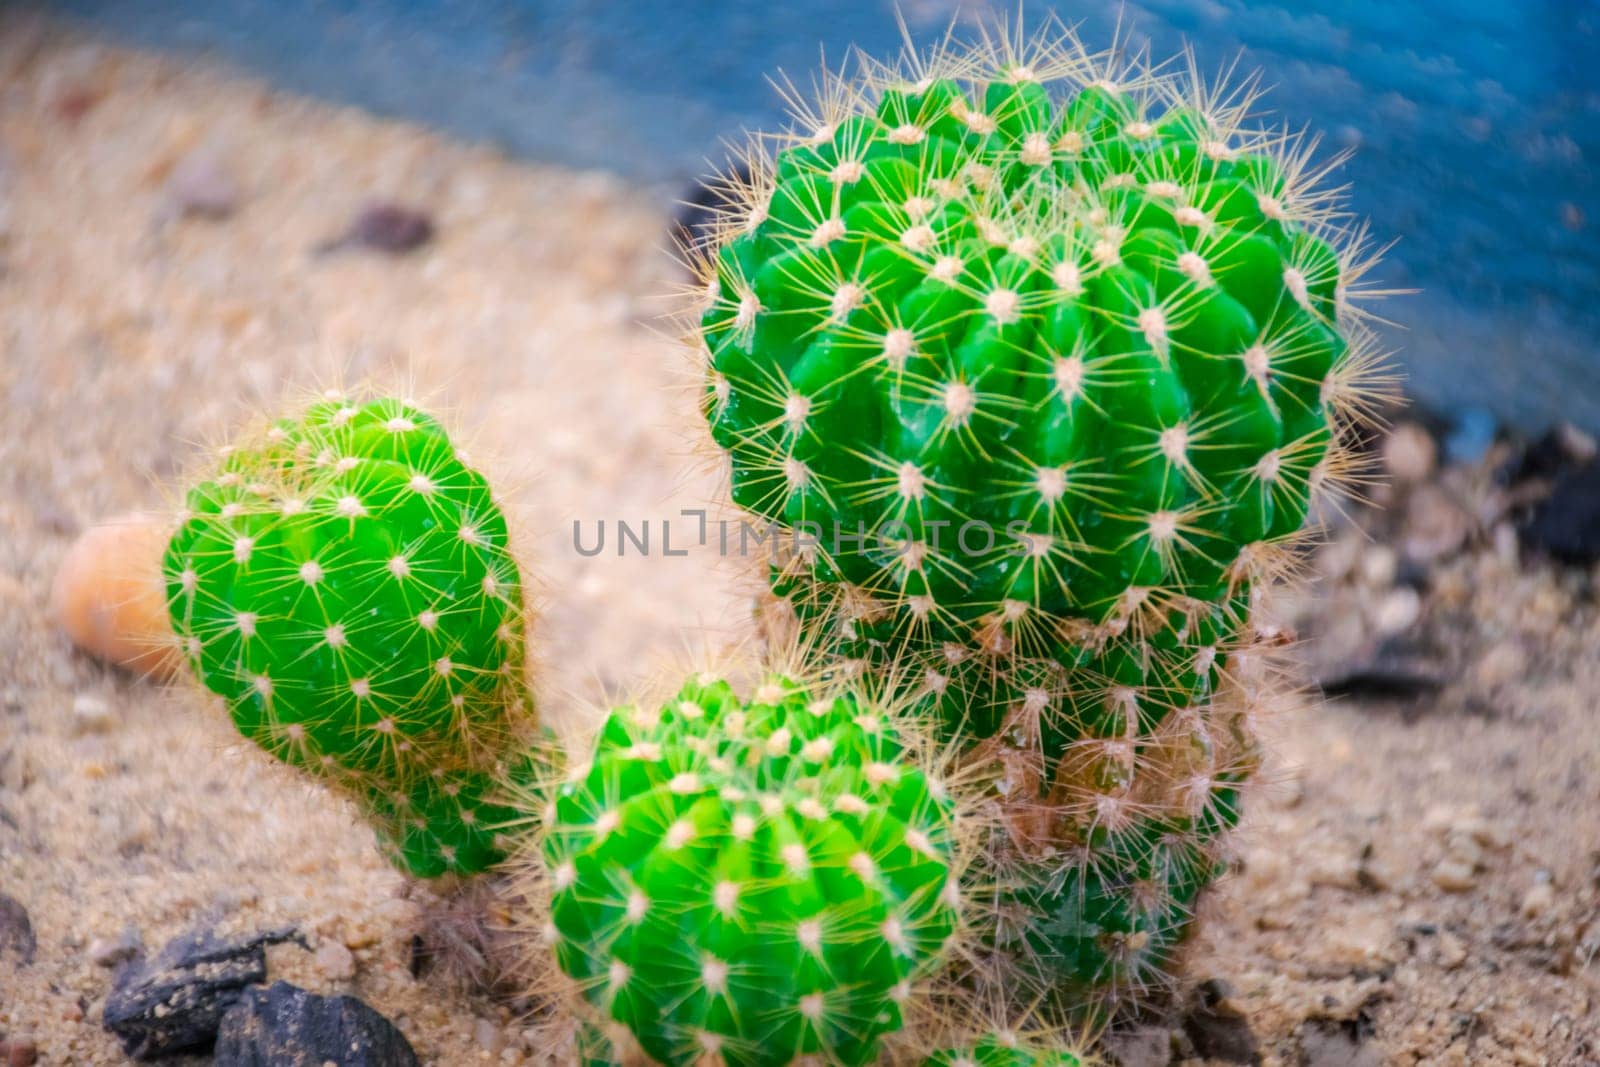 Cactus and Cactus flowers popular for decorative by NongEngEng